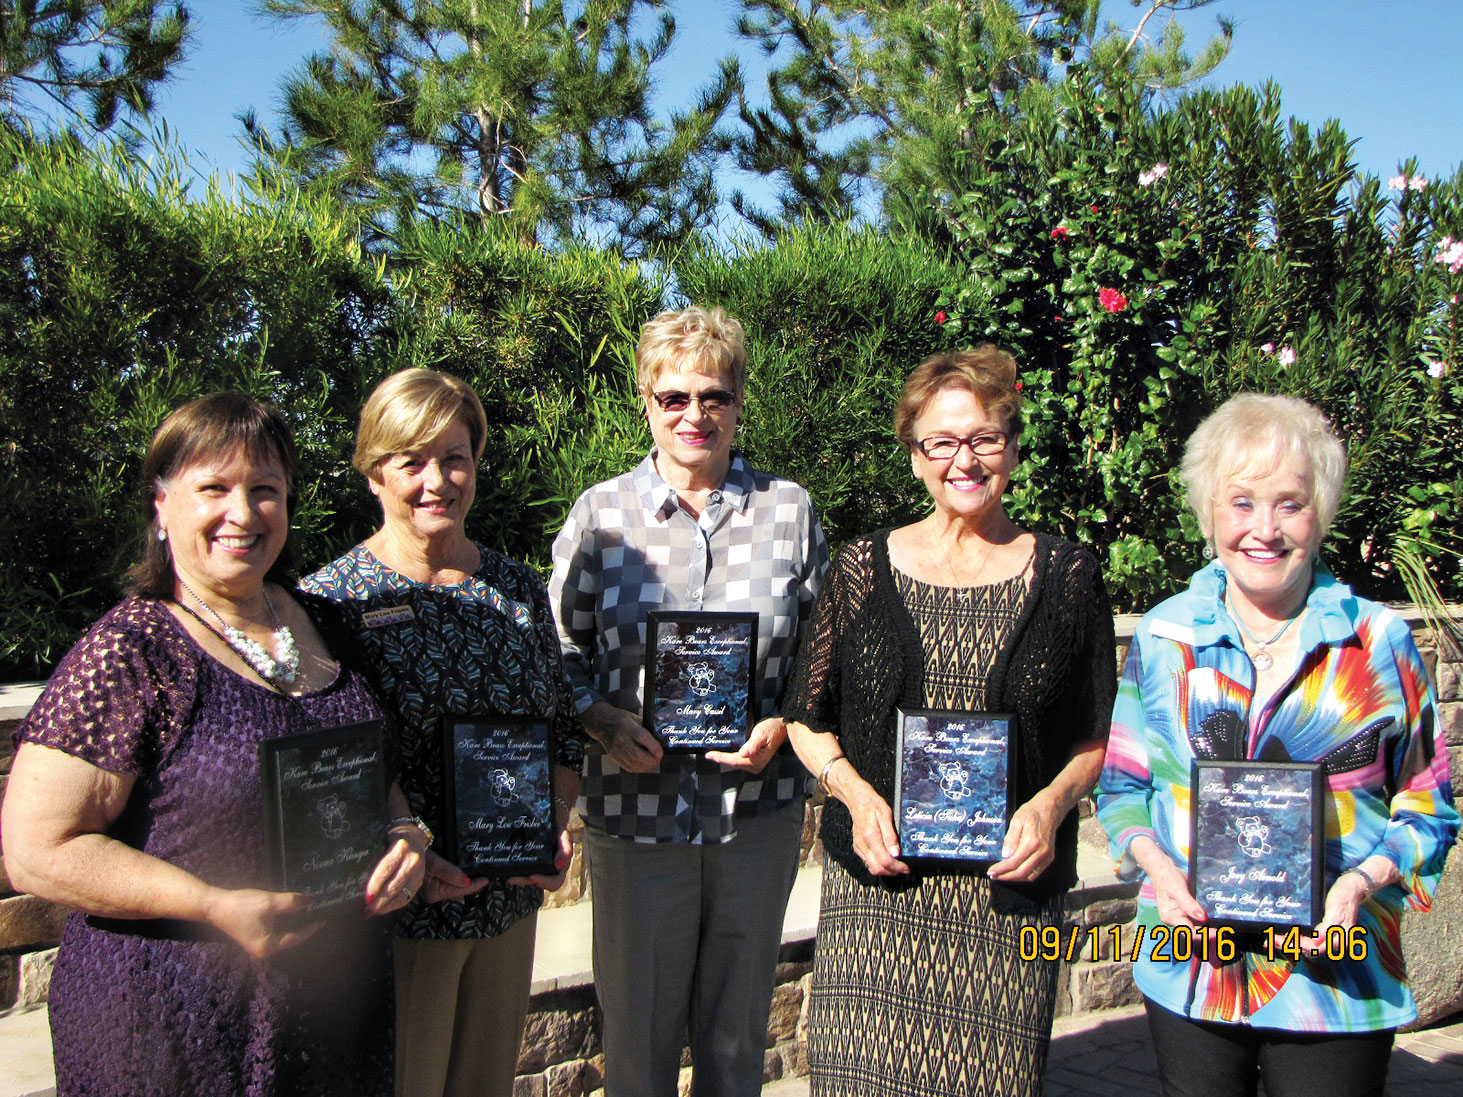 Exceptional Service Awards to Kare Bear volunteers were given to (left to right) Norma Klinger, Mary Lou Frisbie, Mary Cassil, Tisha Johnson and Joey Arnold.